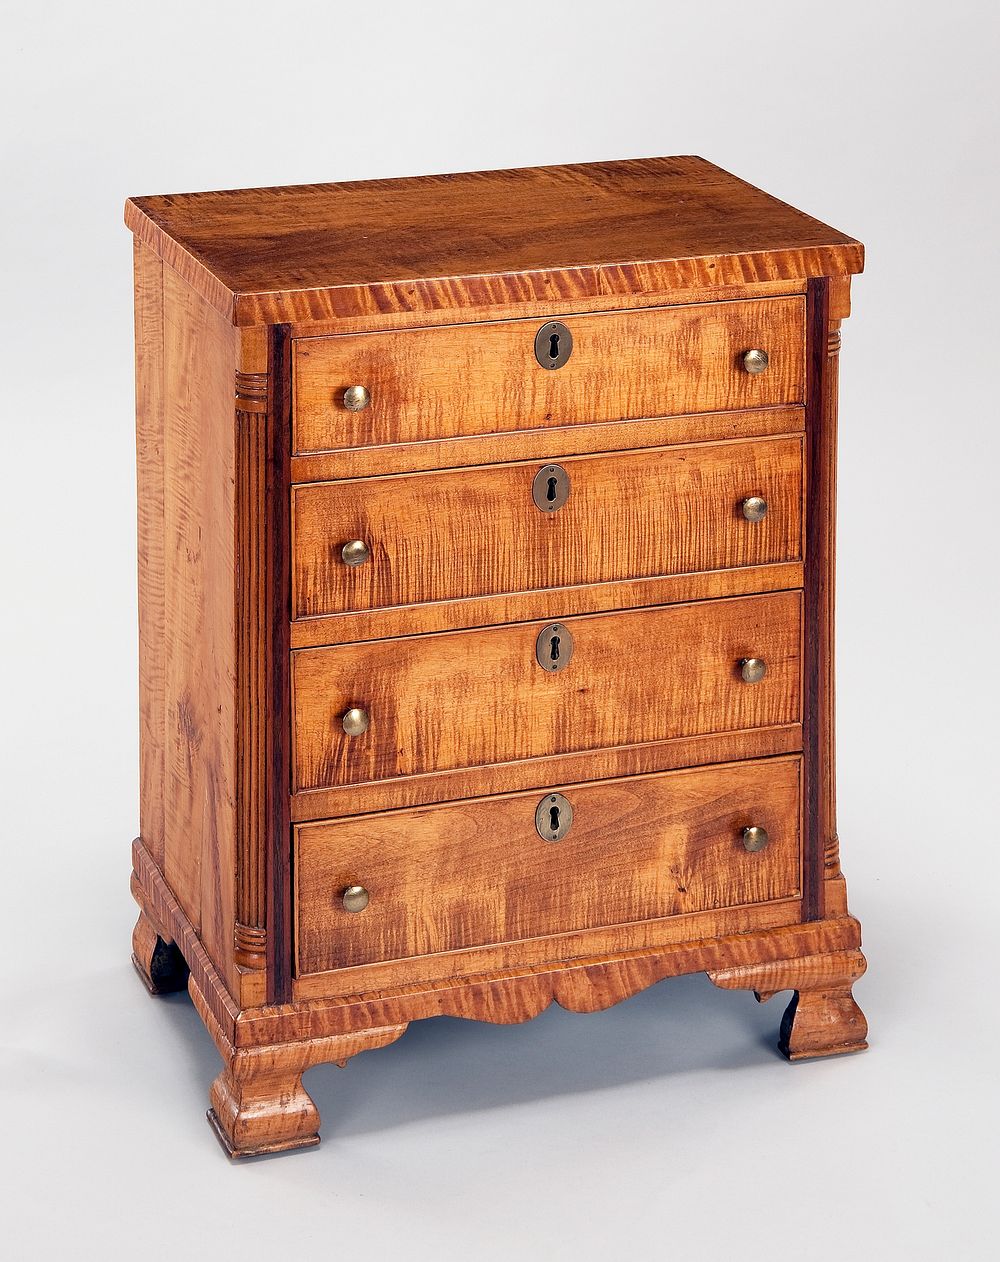 Chest of Drawers by Unidentified Maker